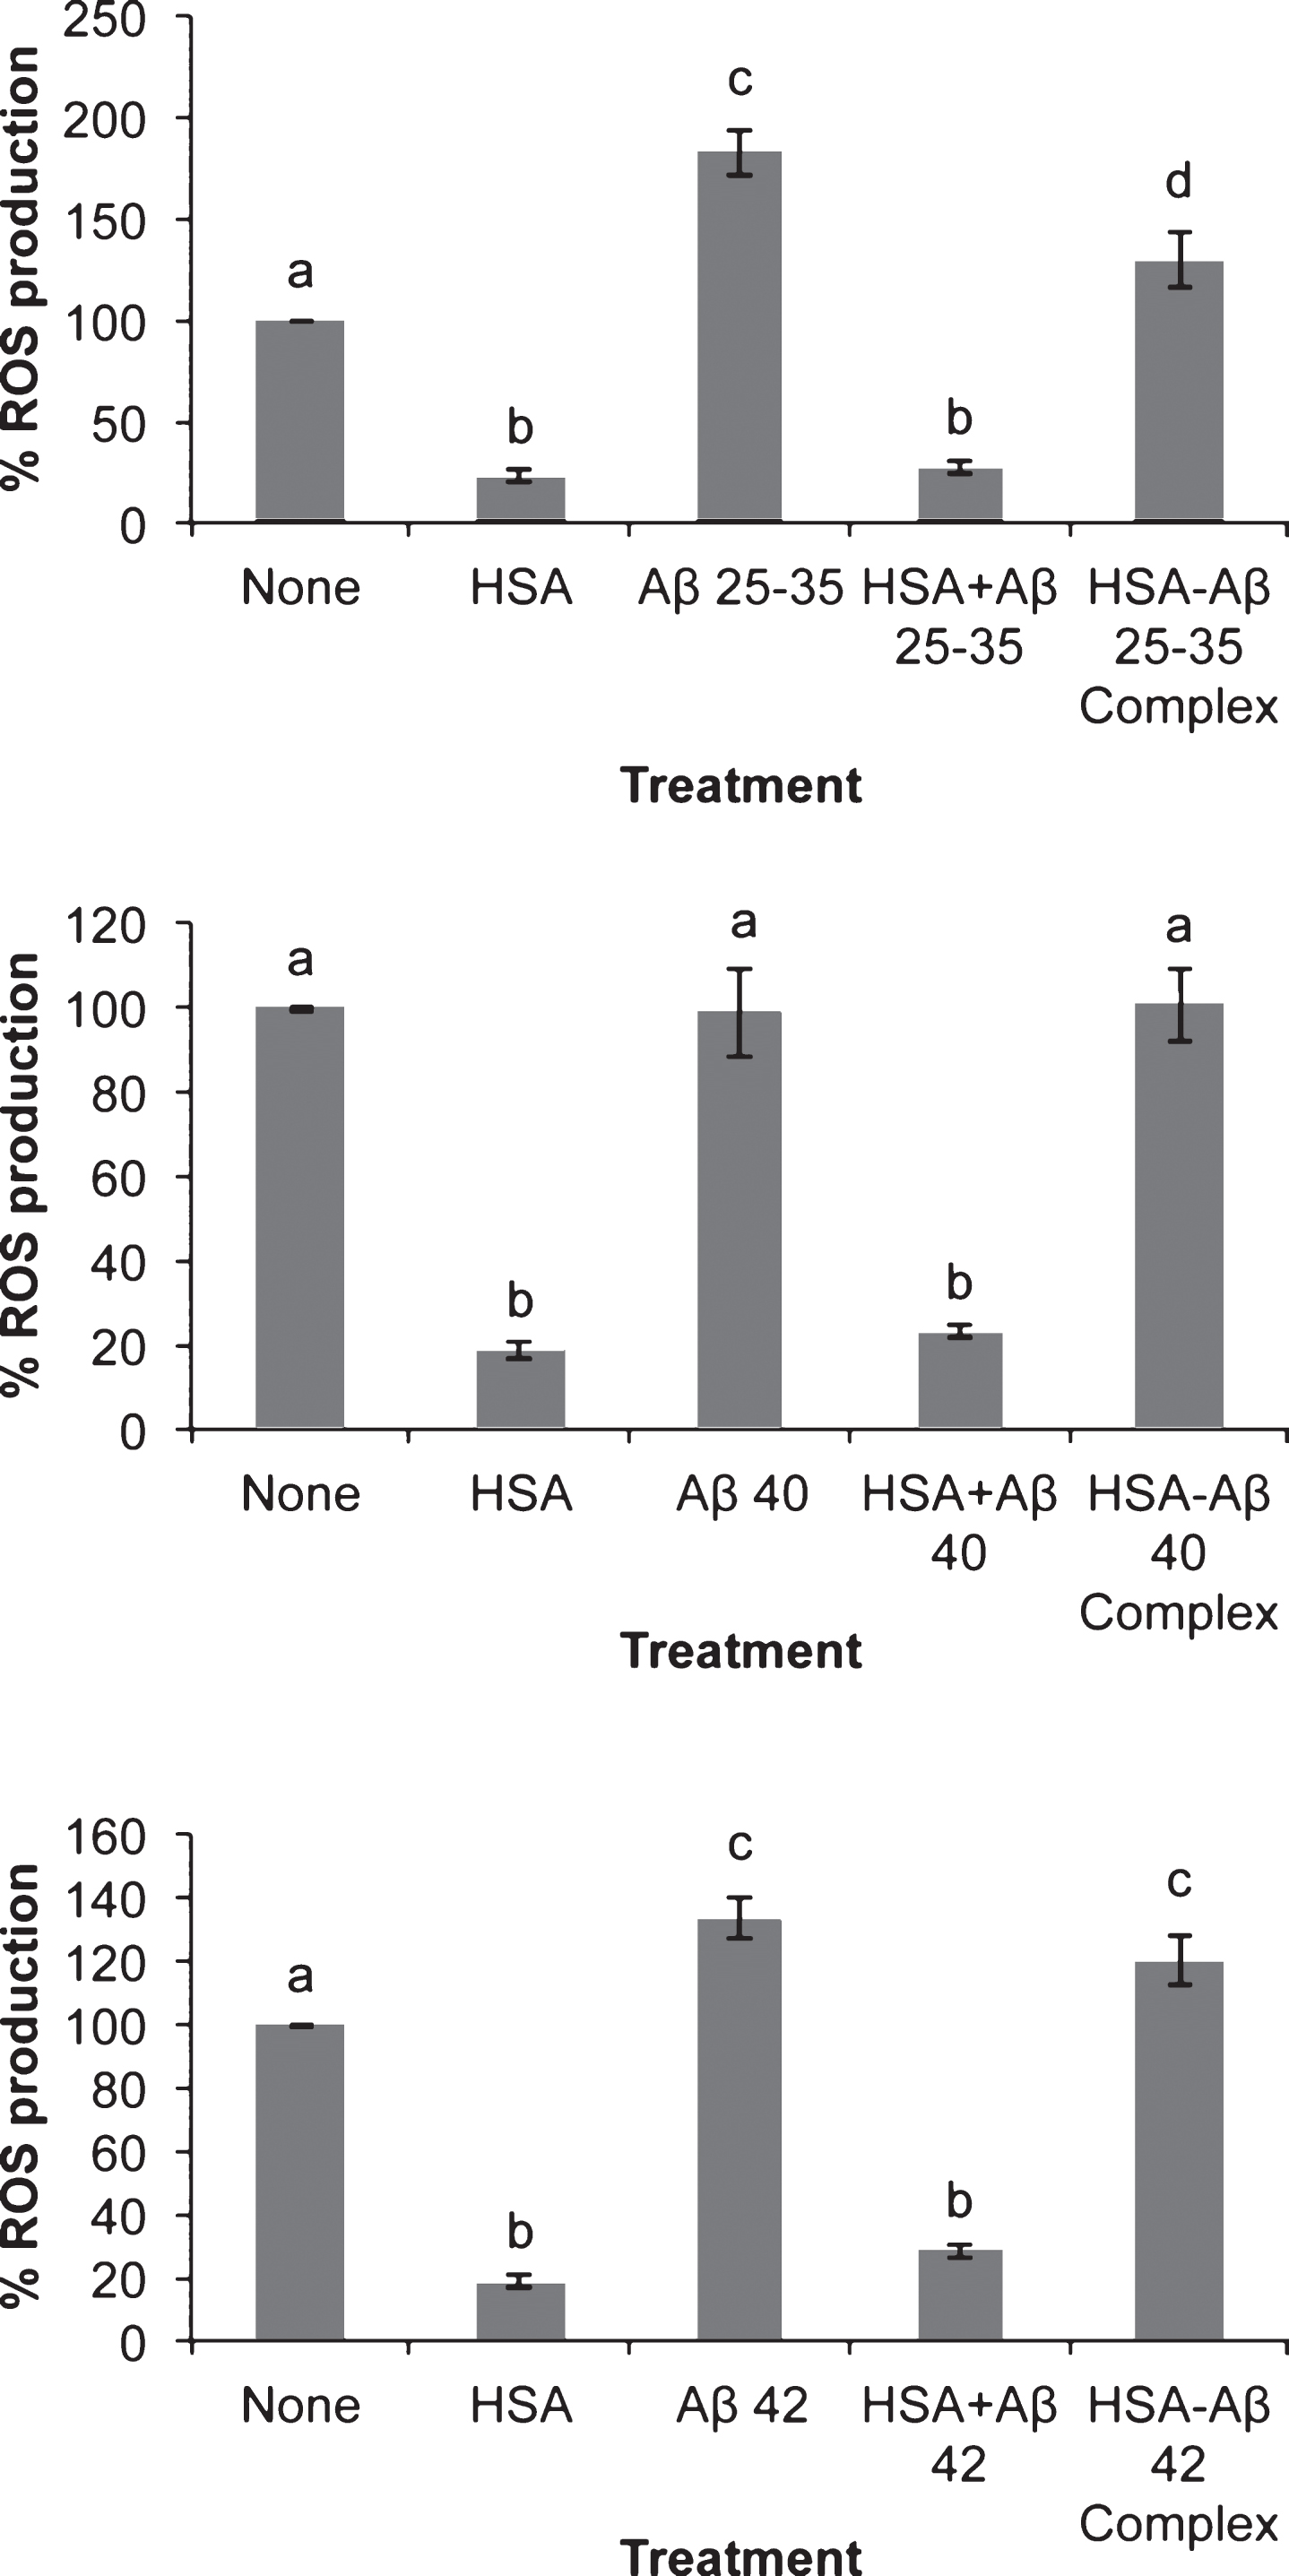 Effect of amyloid-beta peptides on ROS production in the absence or the presence of HSA. Neurons in primary culture (3 DIV) were incubated for 20 h in Hanks medium with three different Aβ peptides: Aβ25-35, Aβ40 or Aβ42 (30 μM) in the absence or the presence of human serum albumin (HSA; 30 μM) or as HSA-Aβ complexes (30 μM). Results were normalized using cell viability data and are expressed as percentages compared to non-treated cells. Results are means±SEM (n≥6). One-way ANOVA and Tukey Test were applied in order to compare different groups. Distinct characters are used to indicate statistically different groups (p < 0.05).